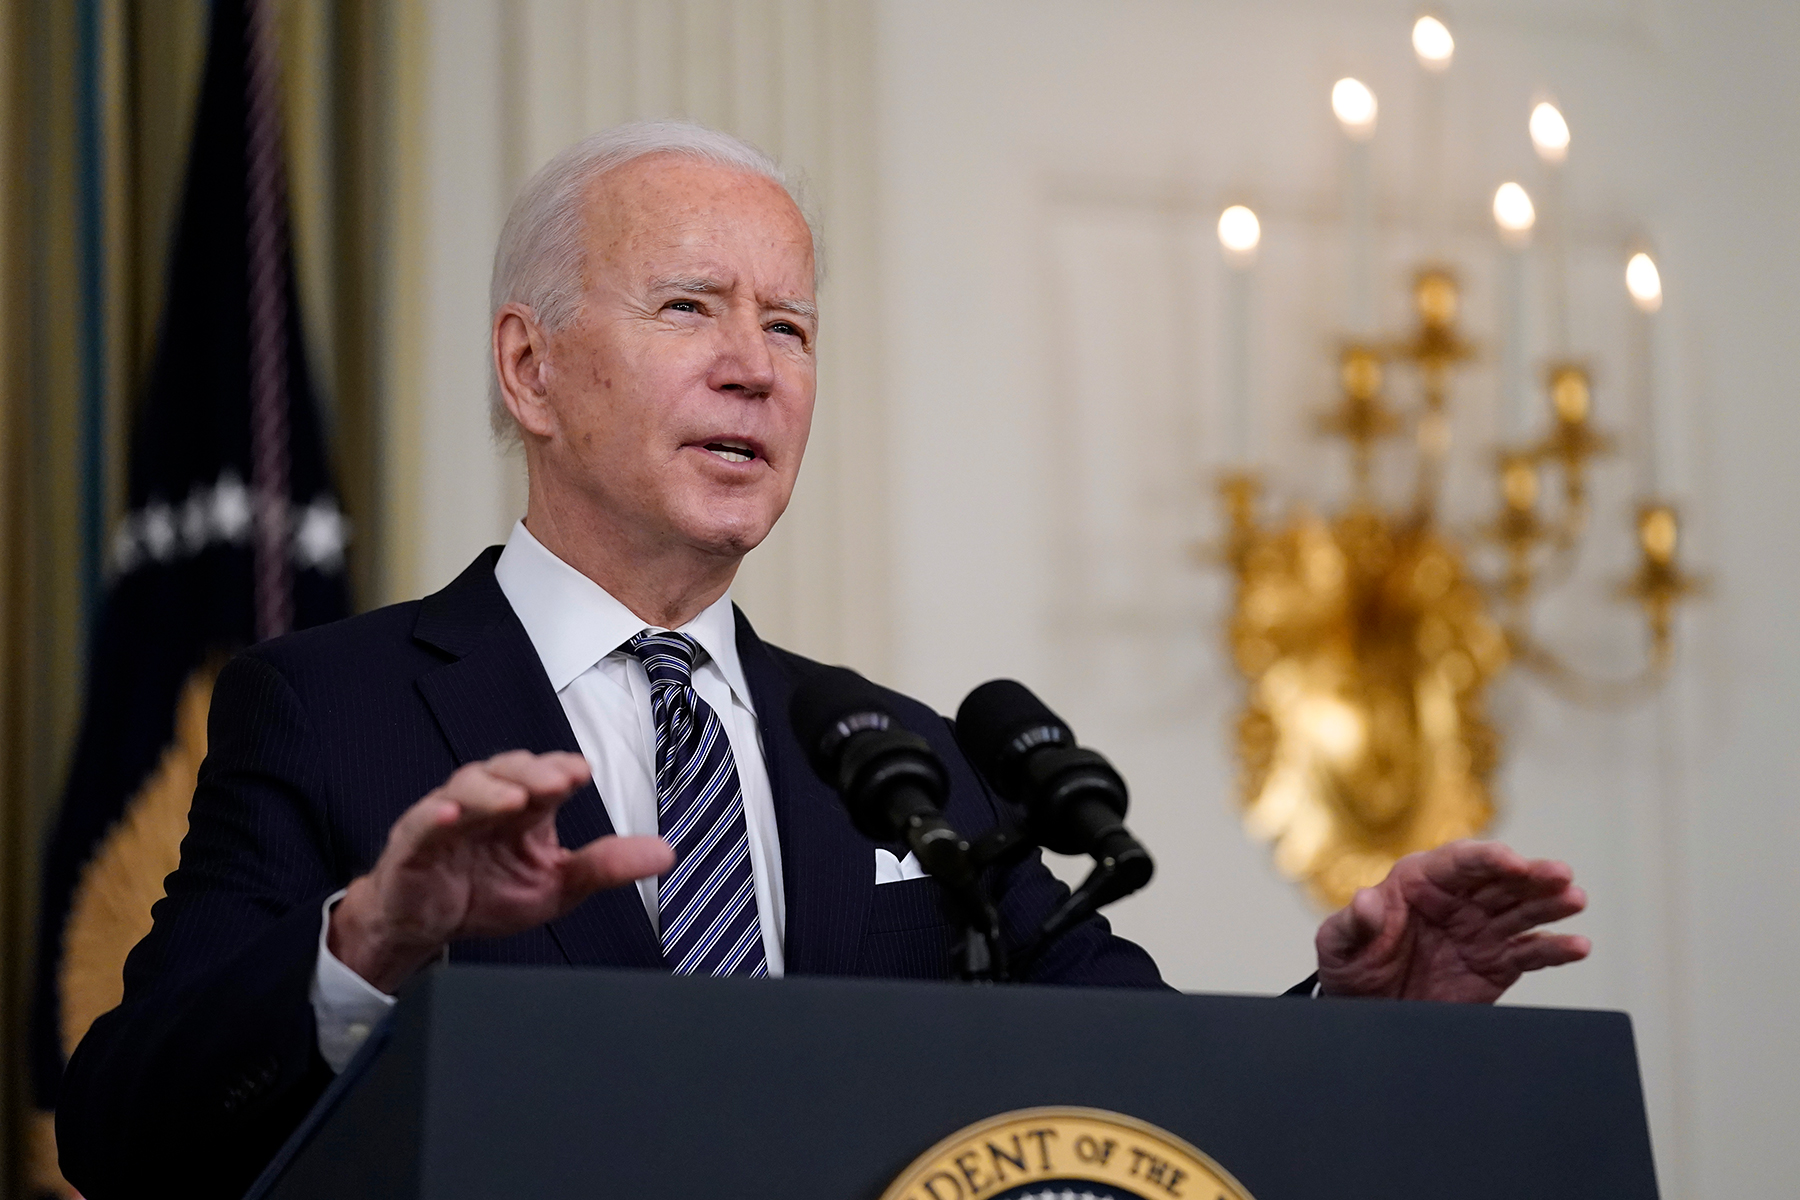 For the First Time as President, Biden Calls for Filibuster Reform